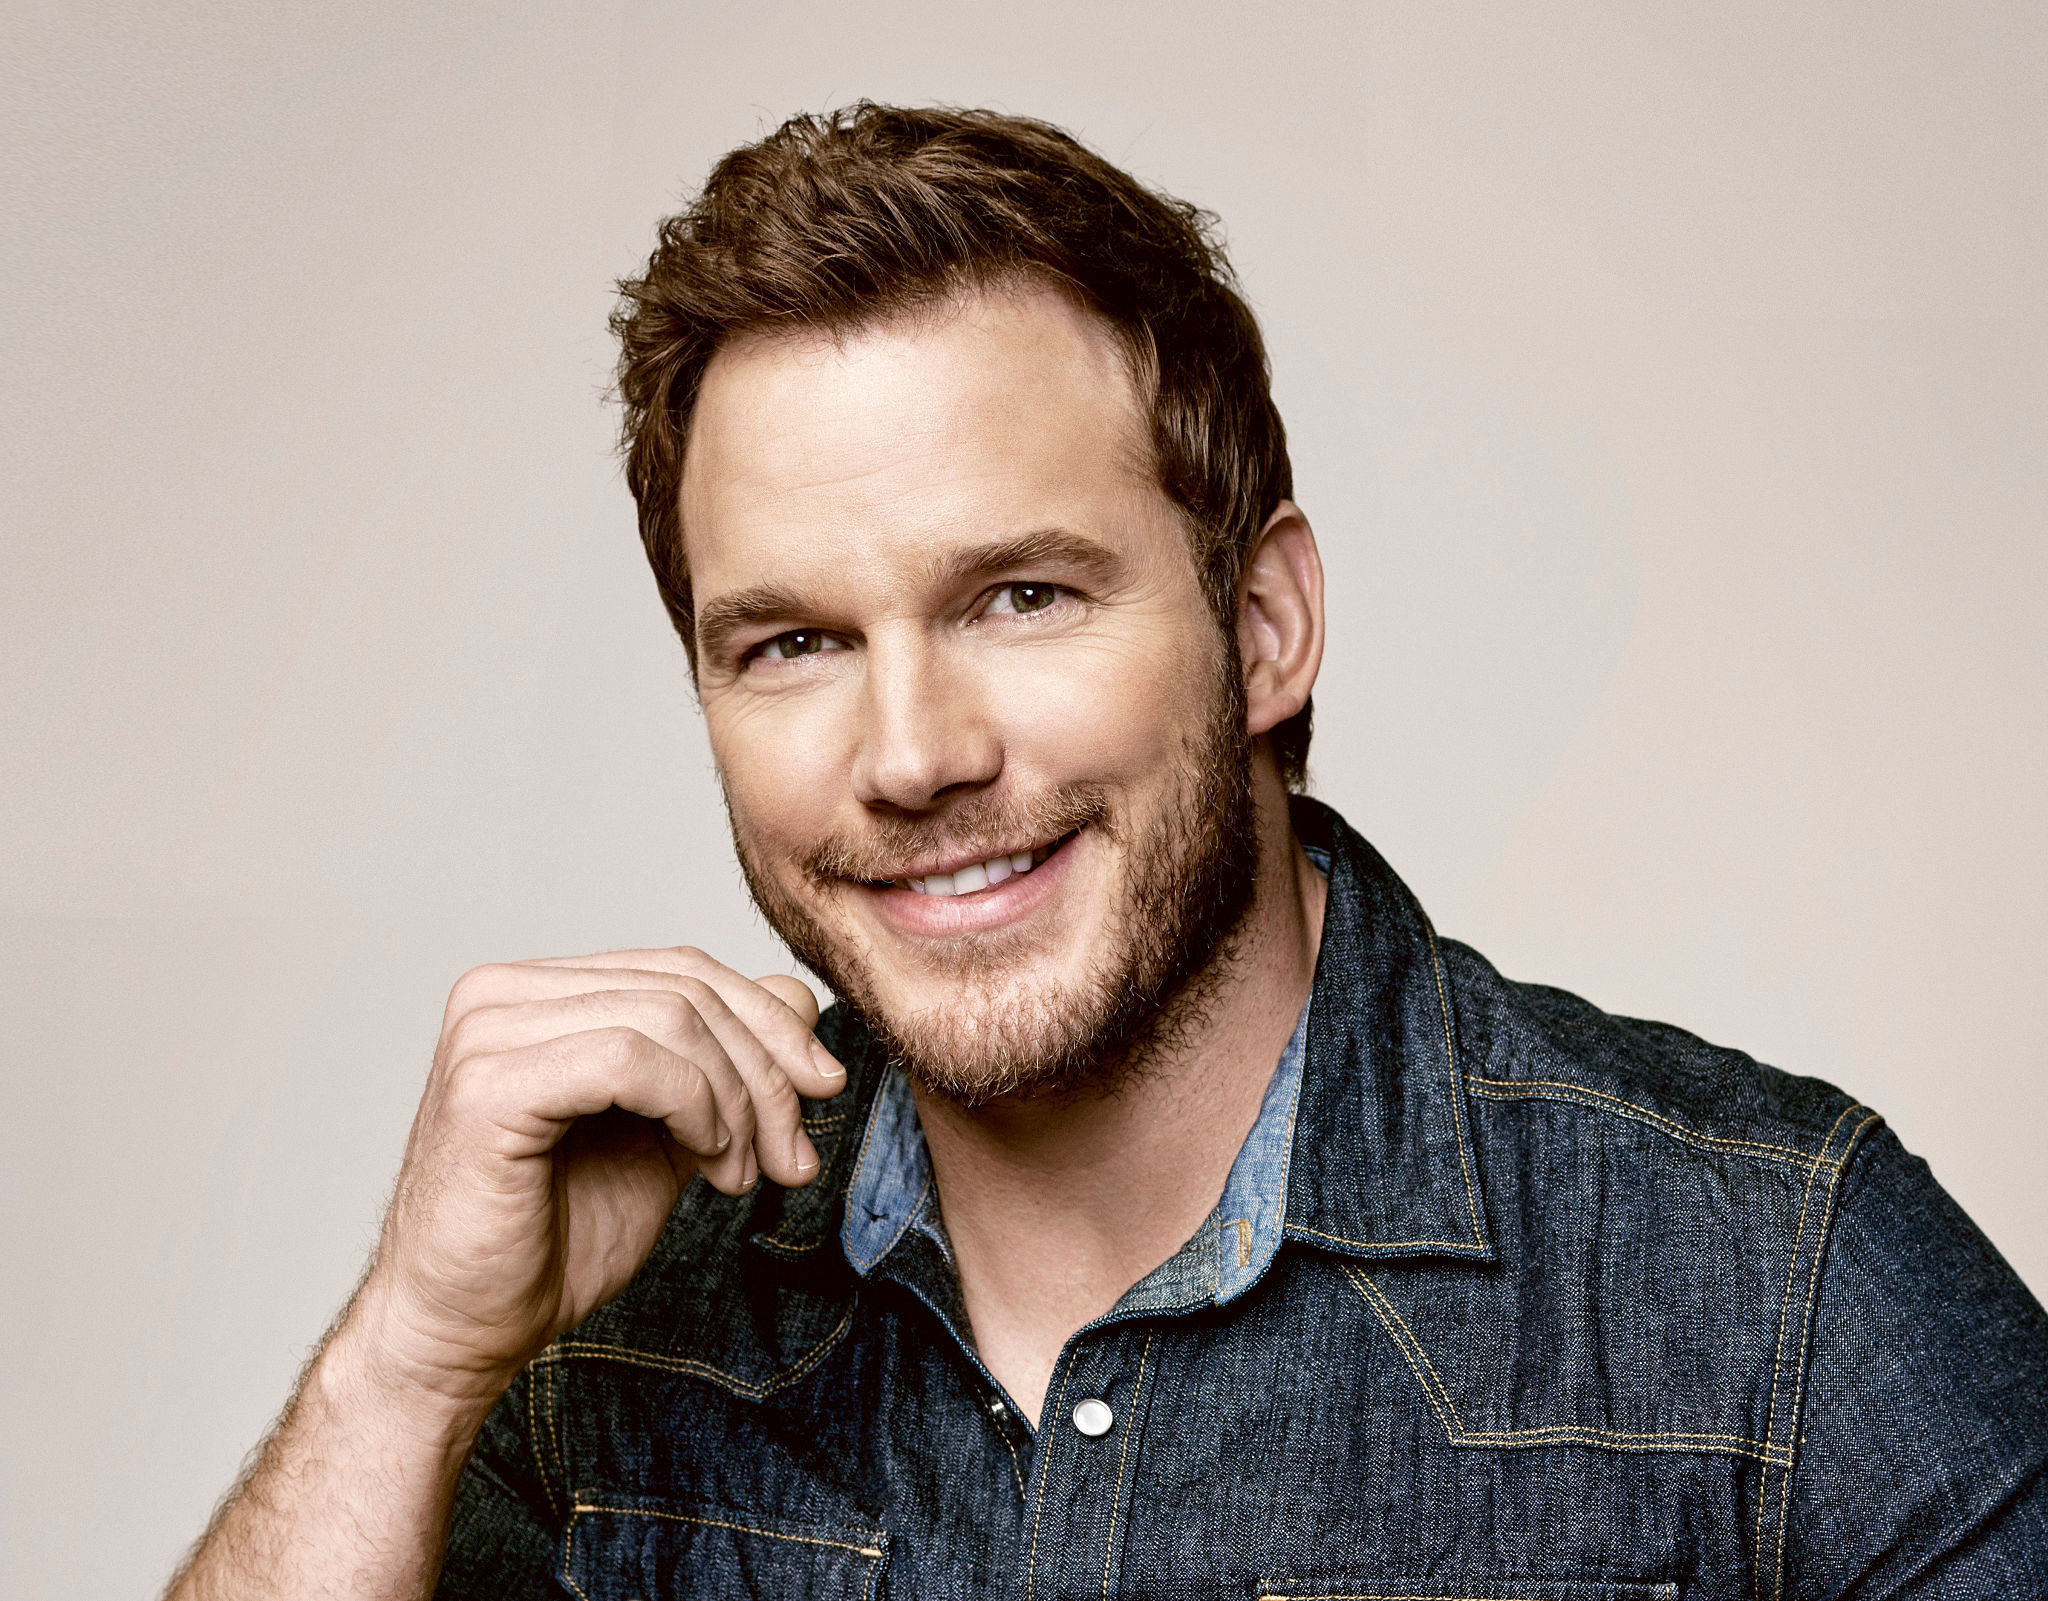 Chris Pratt: Founded the production company Indivisible Productions, February 2020. 2050x1610 HD Wallpaper.